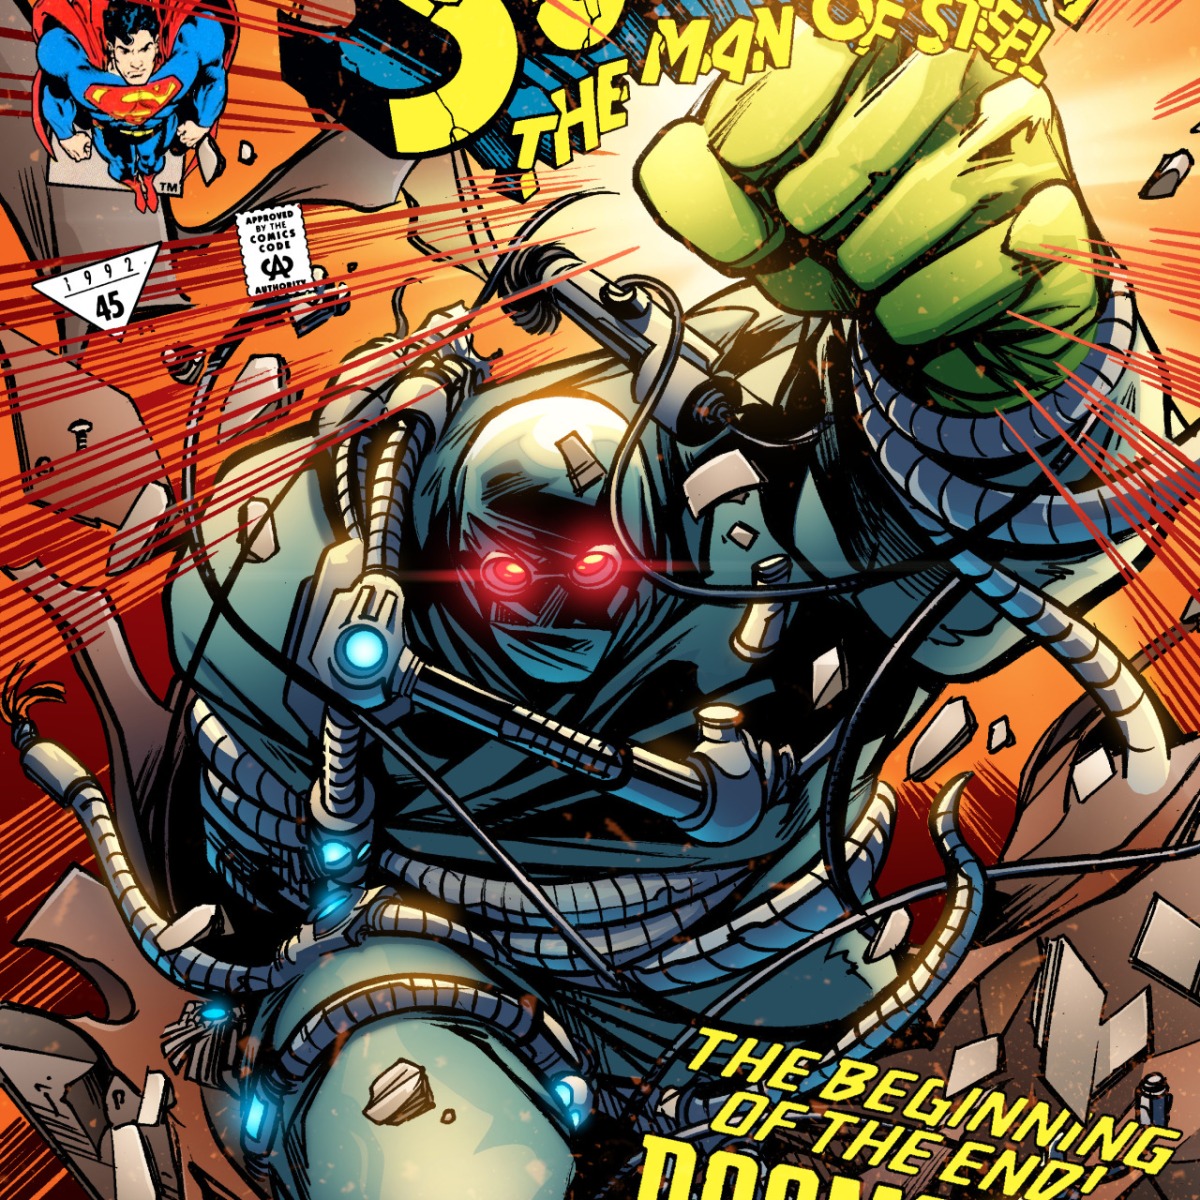 Doomsday’s anniversary – Comic cover remake